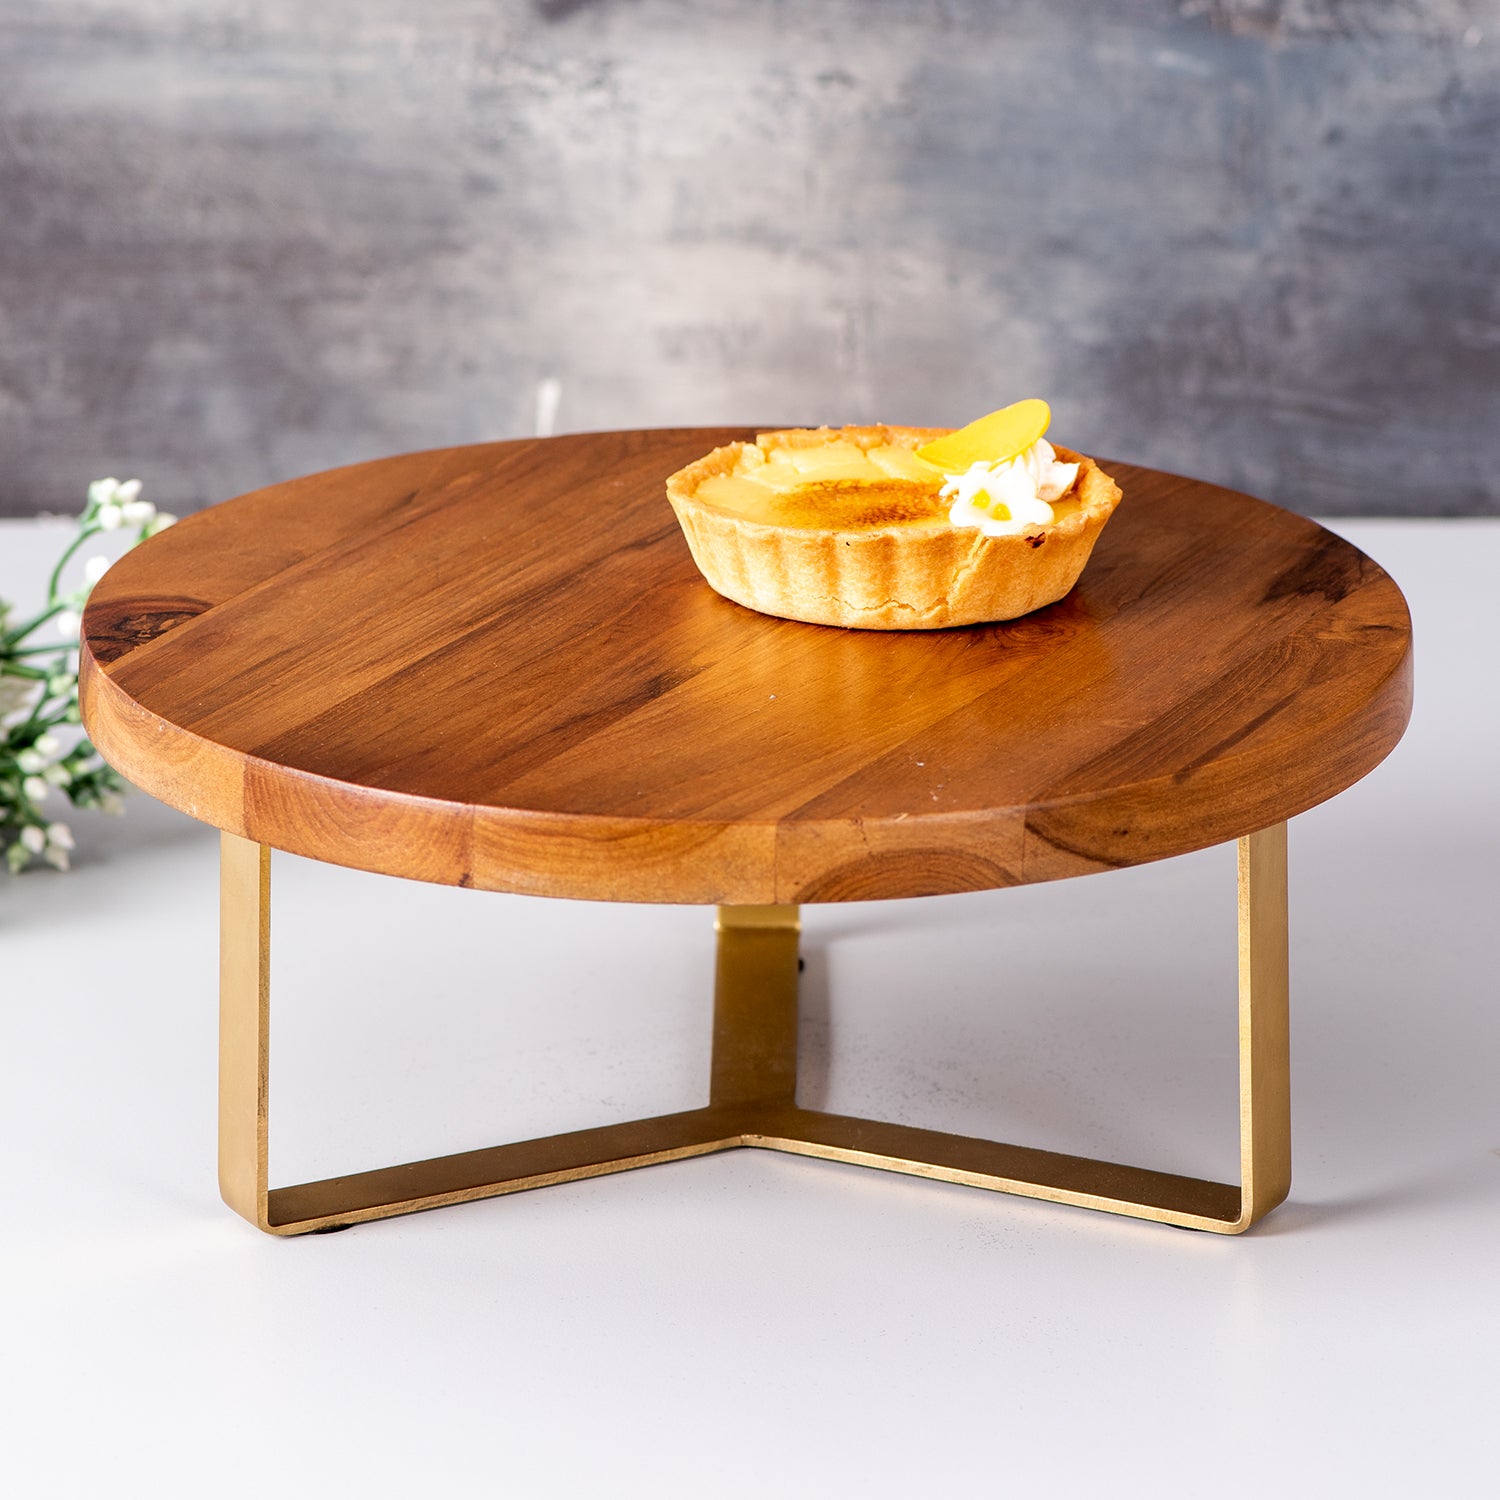 Charlotte Glass Pedestal Cake Stand Plate + Reviews | Crate & Barrel